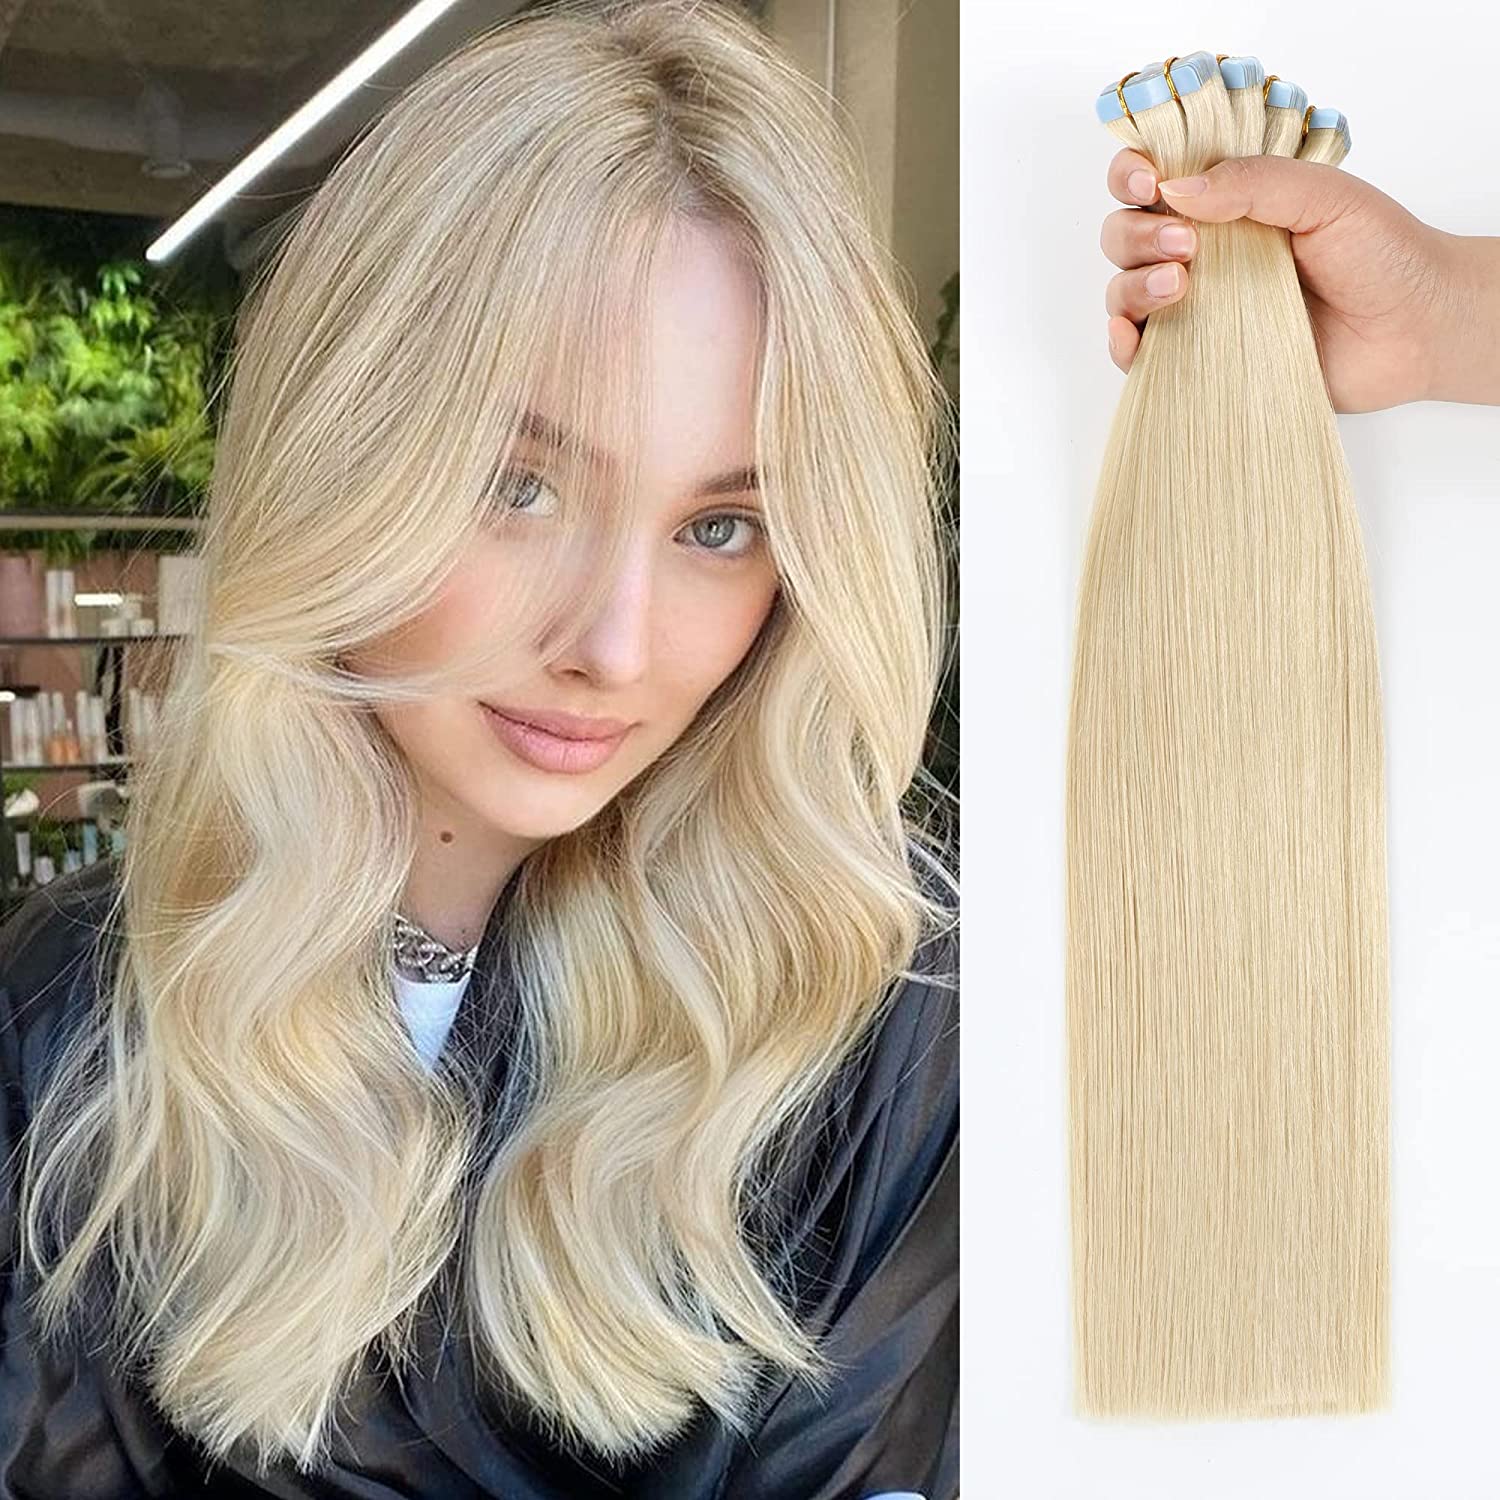 YILITE Hair Extensions Real Human Hair Straight Platinum Blonde 100% Brazilian Human Hair 12 inch-24inch 20pcs pack Seamless Skin Weft Tape in Extensions for White Women